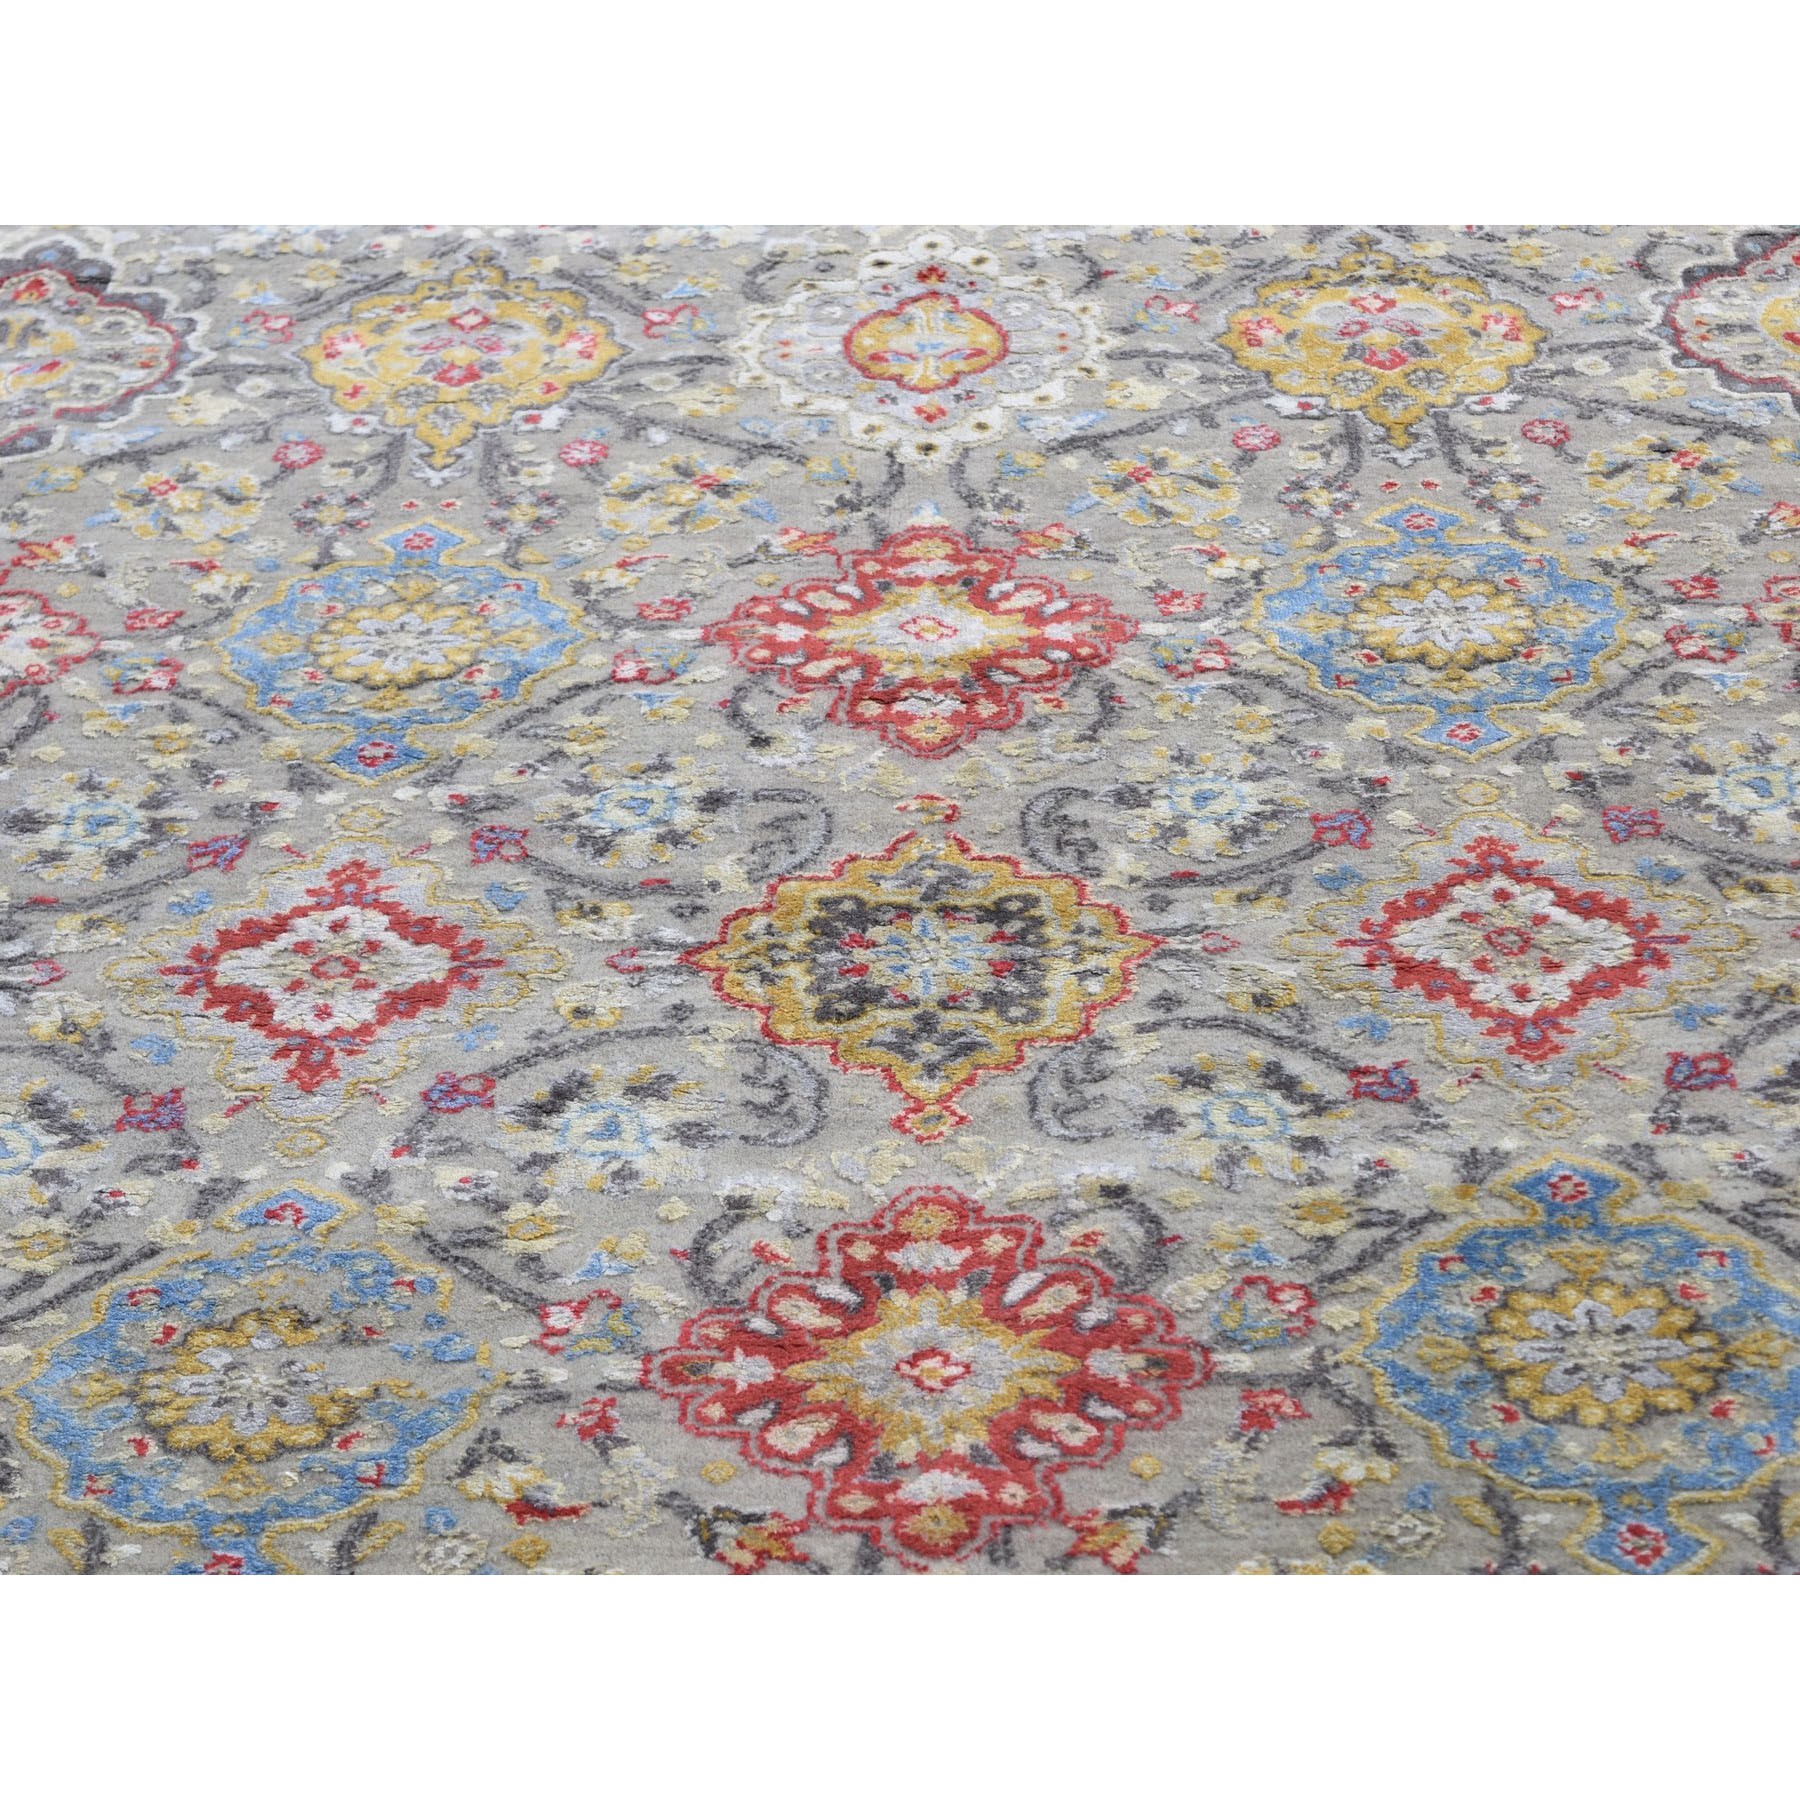 10-3 x10-3  Square THE SUNSET ROSETTES Wool And Pure Silk Hand Knotted Oriental Rug 